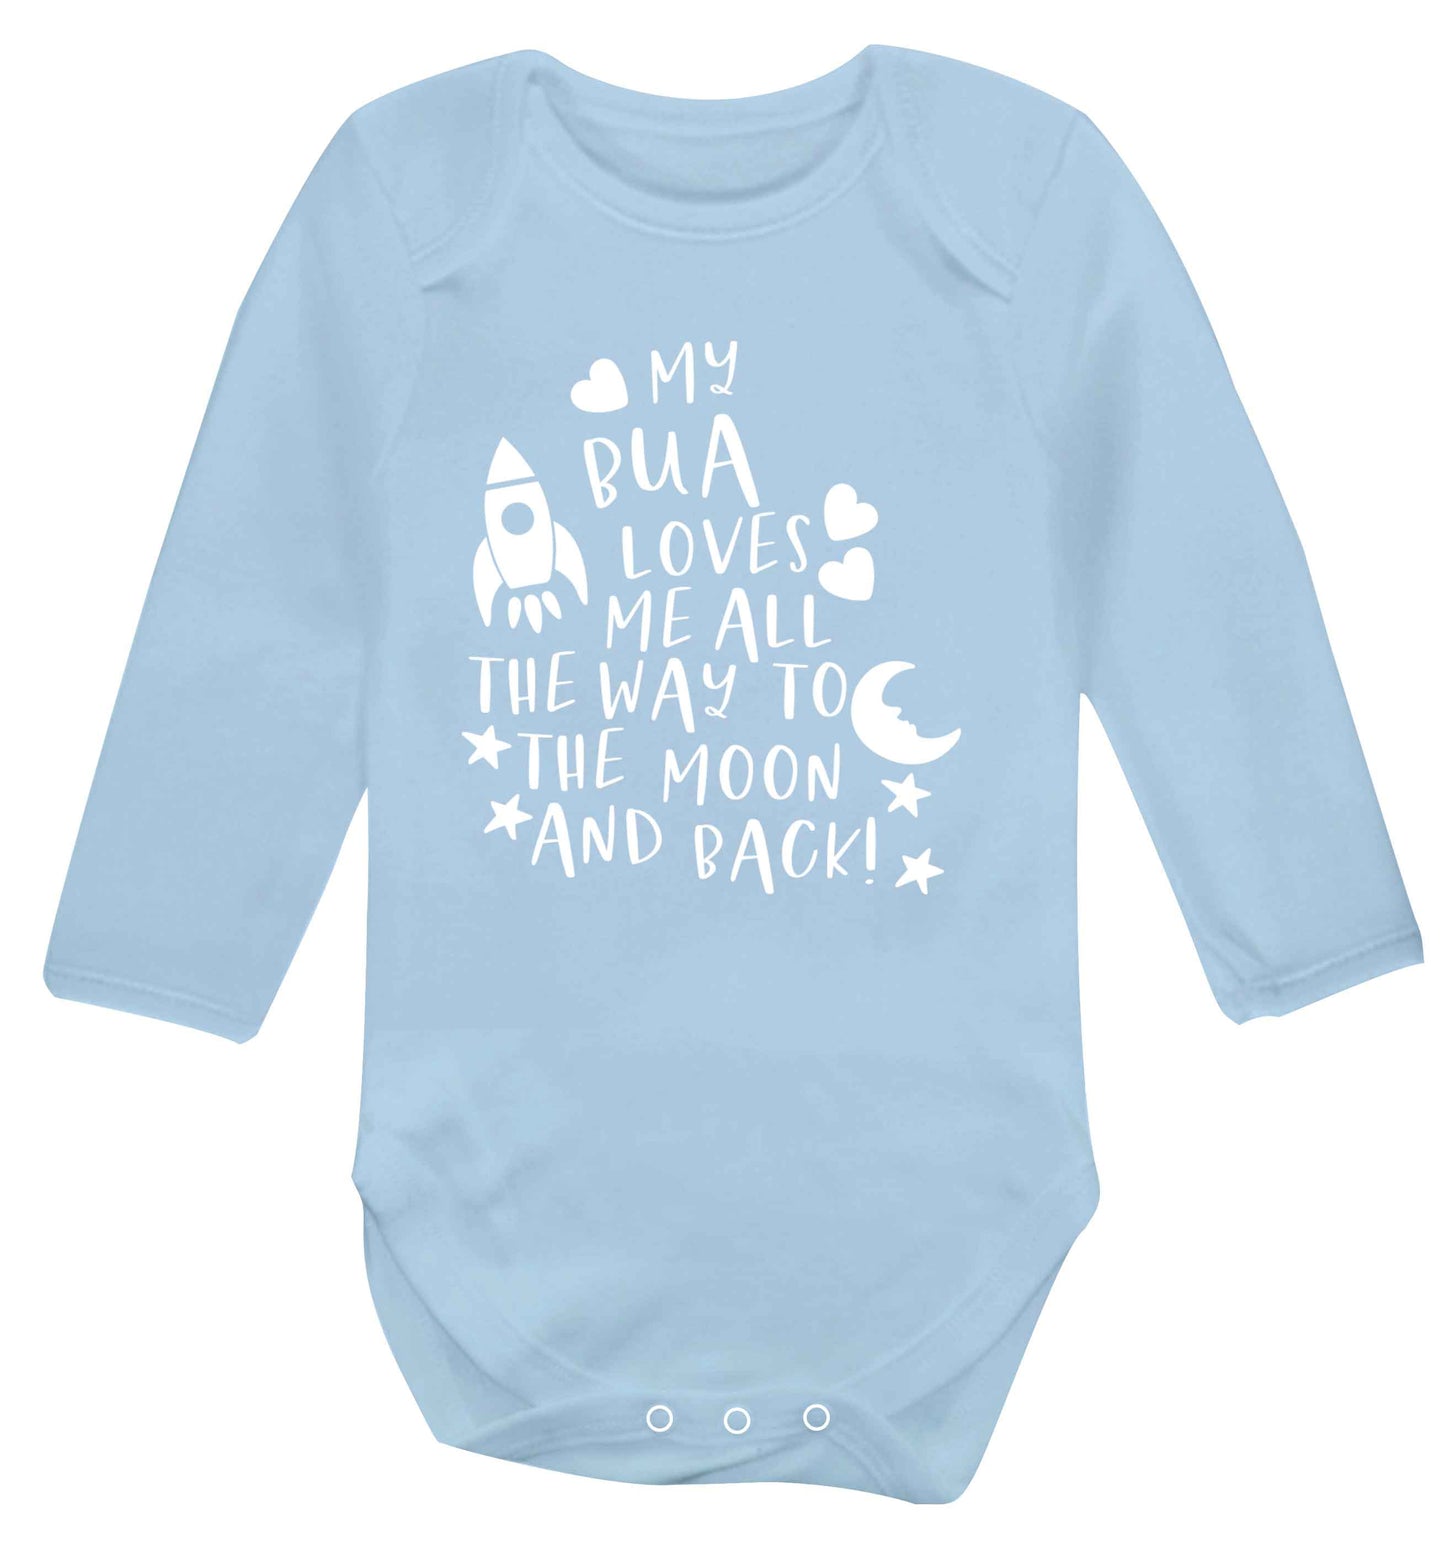 My bua loves me all they way to the moon and back Baby Vest long sleeved pale blue 6-12 months